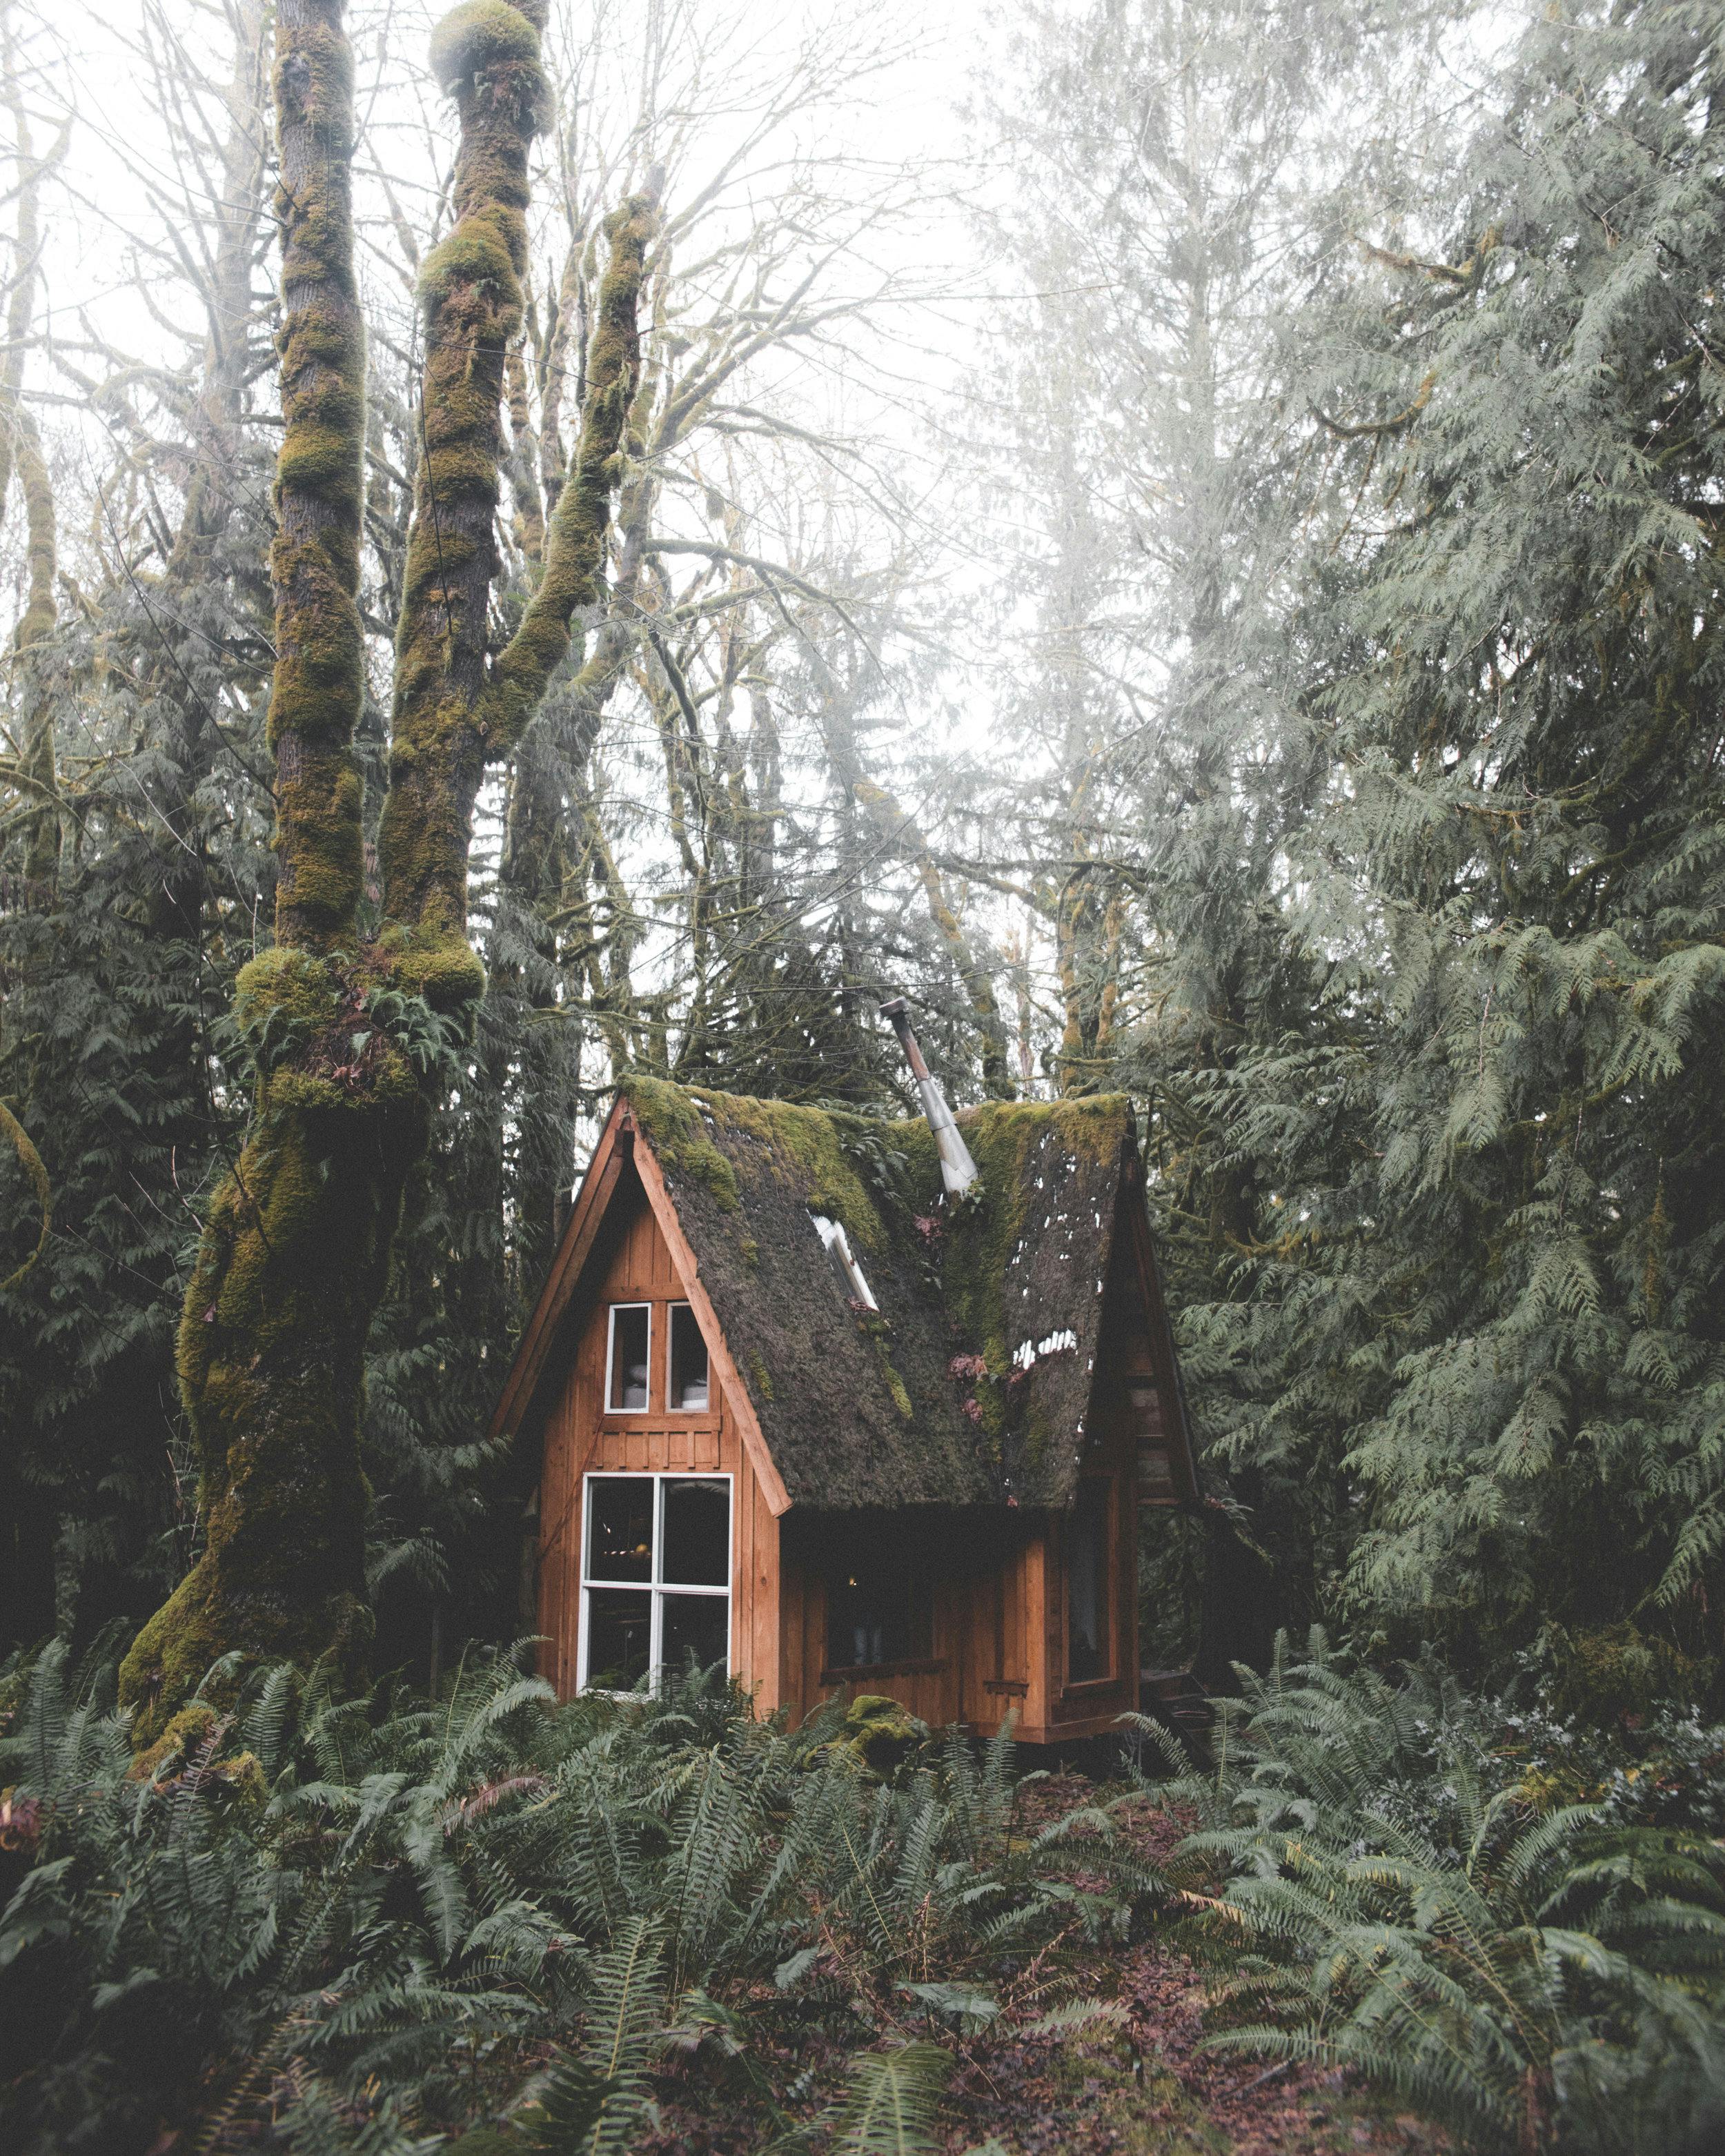 Photo of a wooden house in the forest. | Photo: Pexels